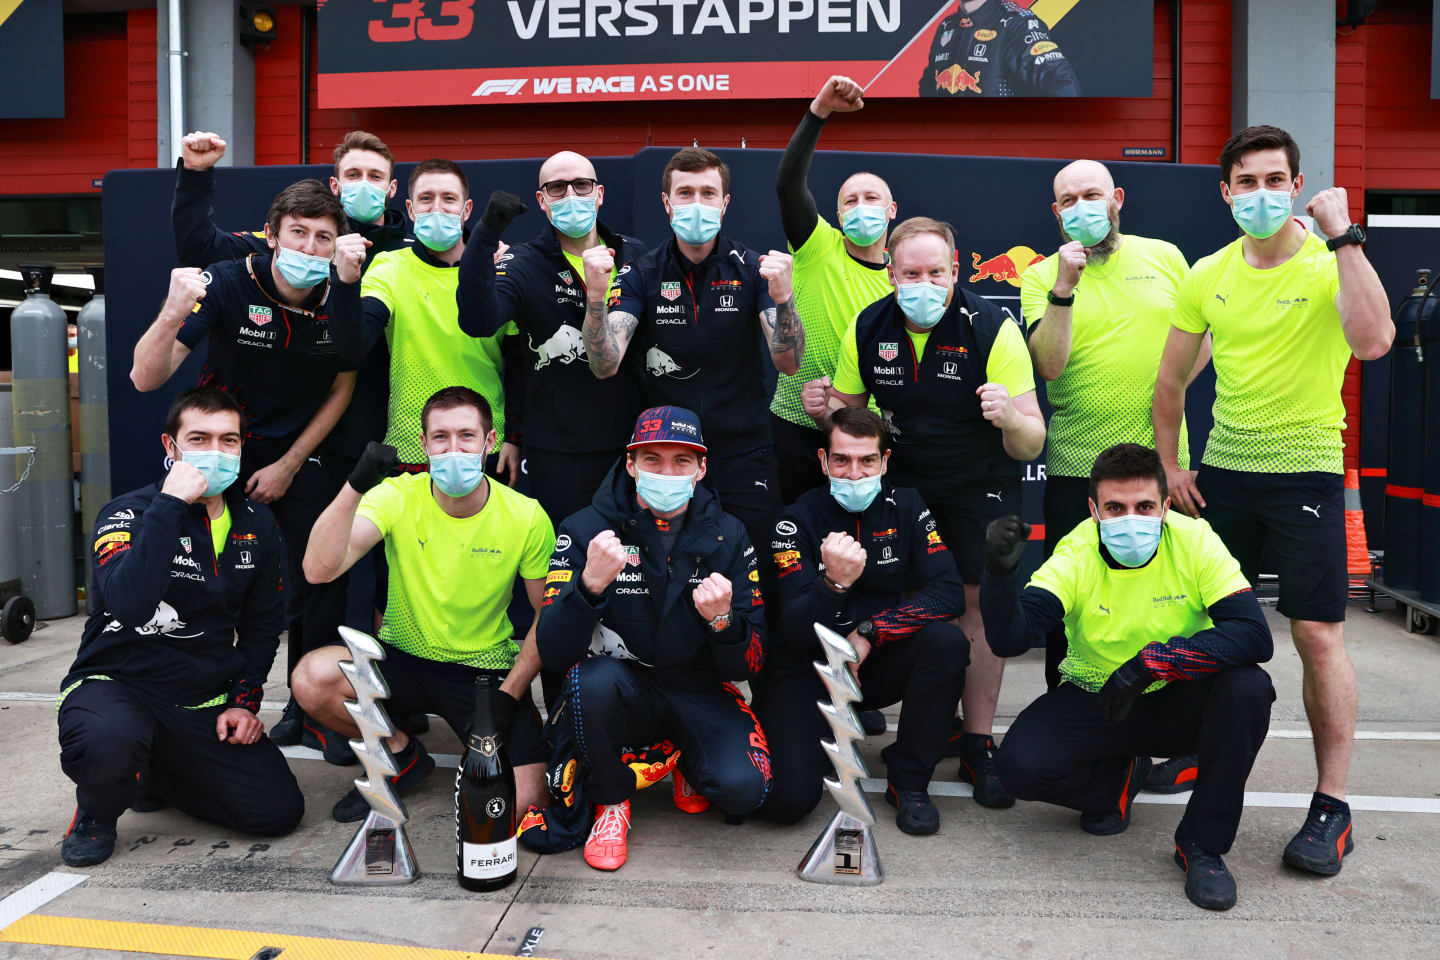 IMOLA, ITALY - APRIL 18: Race winner Max Verstappen of Netherlands and Red Bull Racing celebrates with his team after the F1 Grand Prix of Emilia Romagna at Autodromo Enzo e Dino Ferrari on April 18, 2021 in Imola, Italy. (Photo by Mark Thompson/Getty Images)